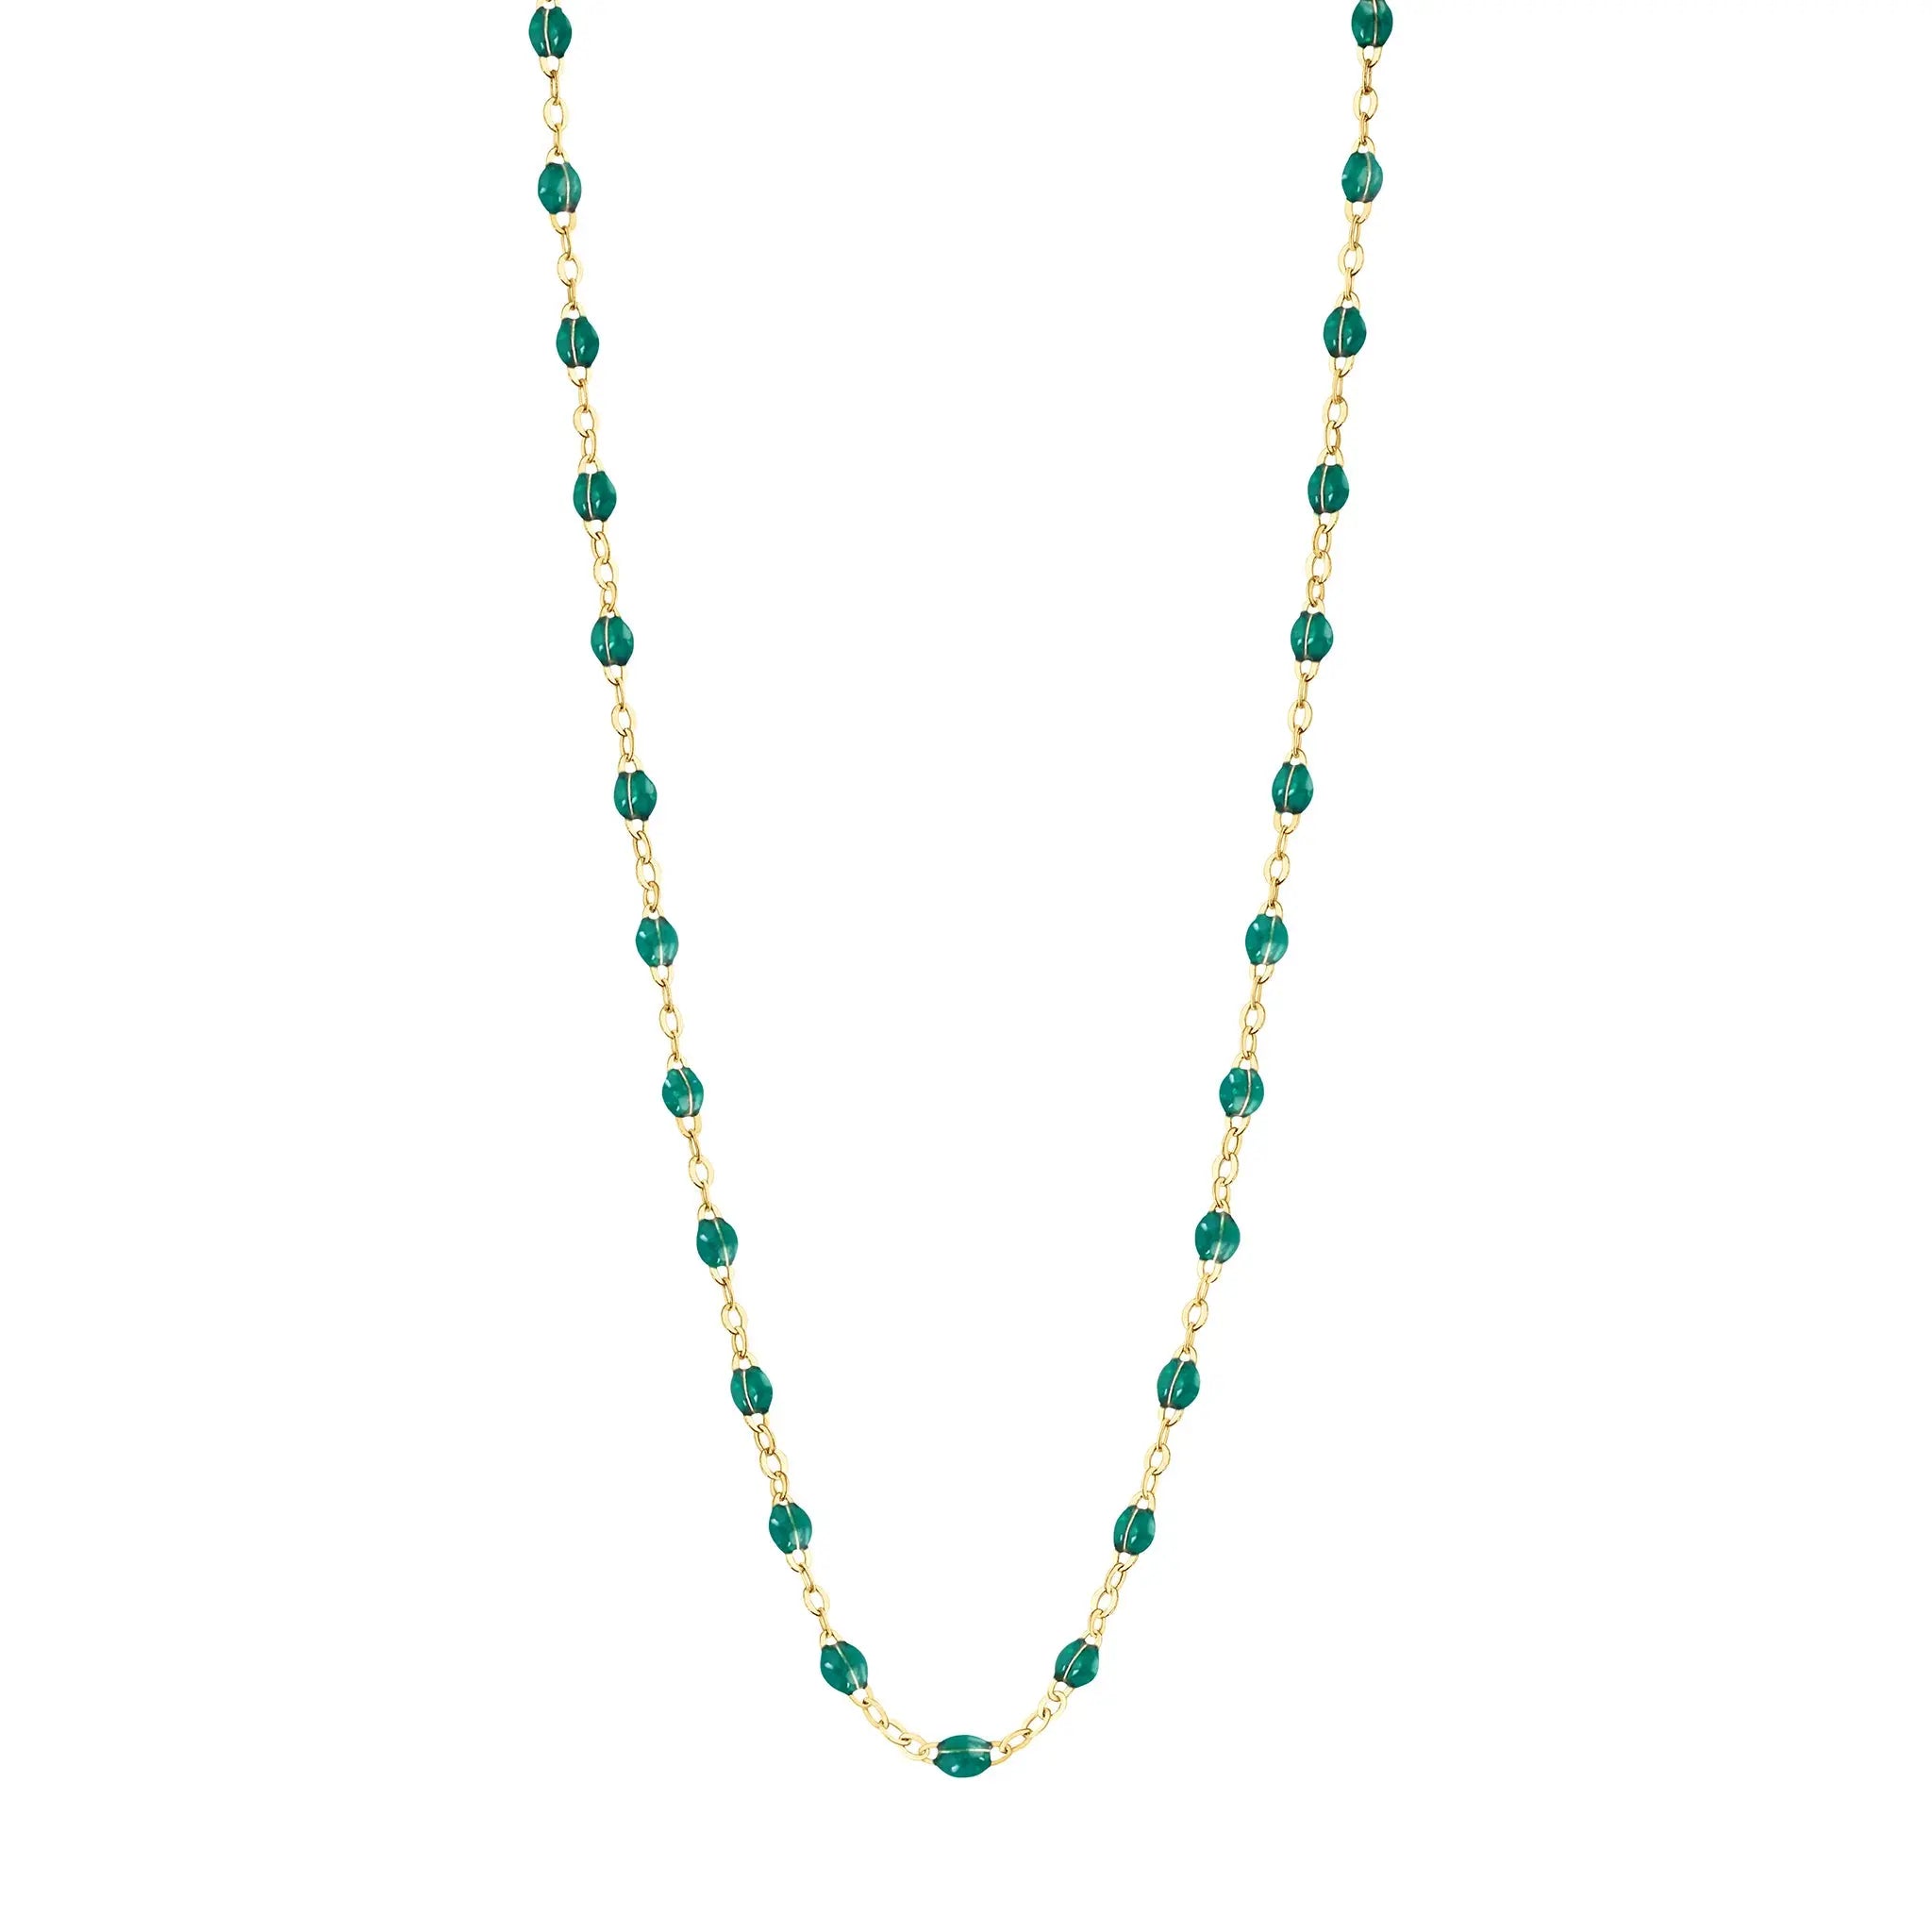 Stack you necklace layers with this versatile beaded chain! The Classic Gigi Necklace by gigi CLOZEAU features 18 carat yellow gold, and striking Emerald resin jewels for an everyday effortless appearance. Handcrafted in 18k yellow gold. The beads measure 1.50mm in diameter and is finished with a spring ring clasp. The length is 16.5 inches.